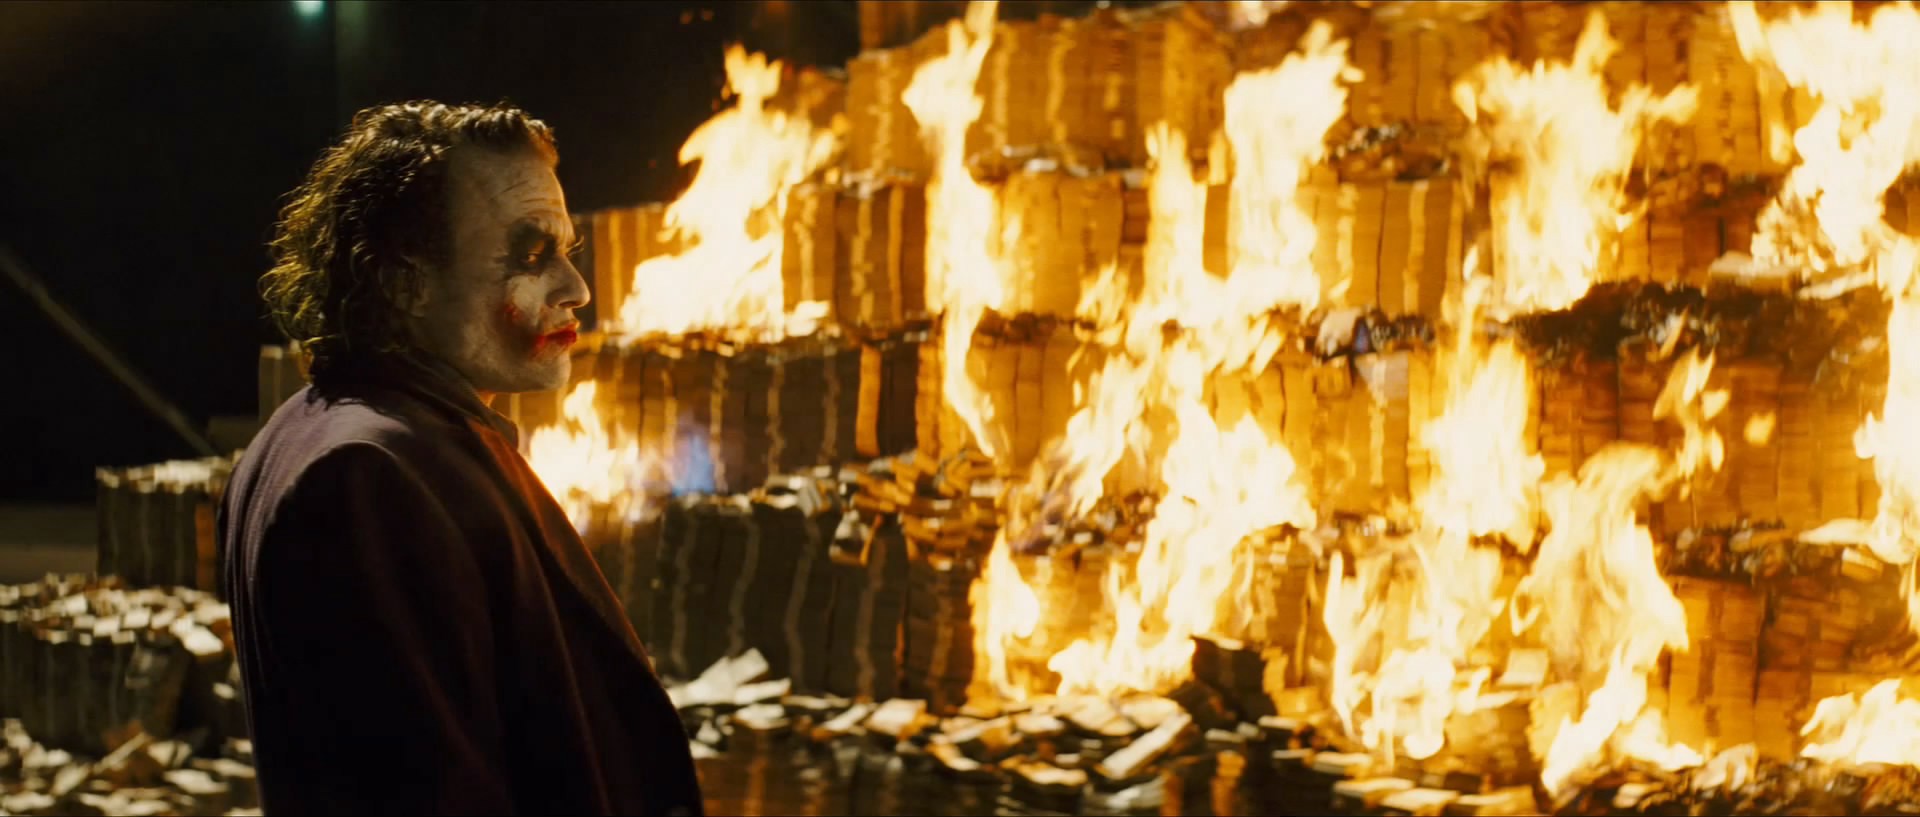 Buying a PSVR can at first seem like this scene of the Joker in The Dark Knight, where he sets all his money on fire